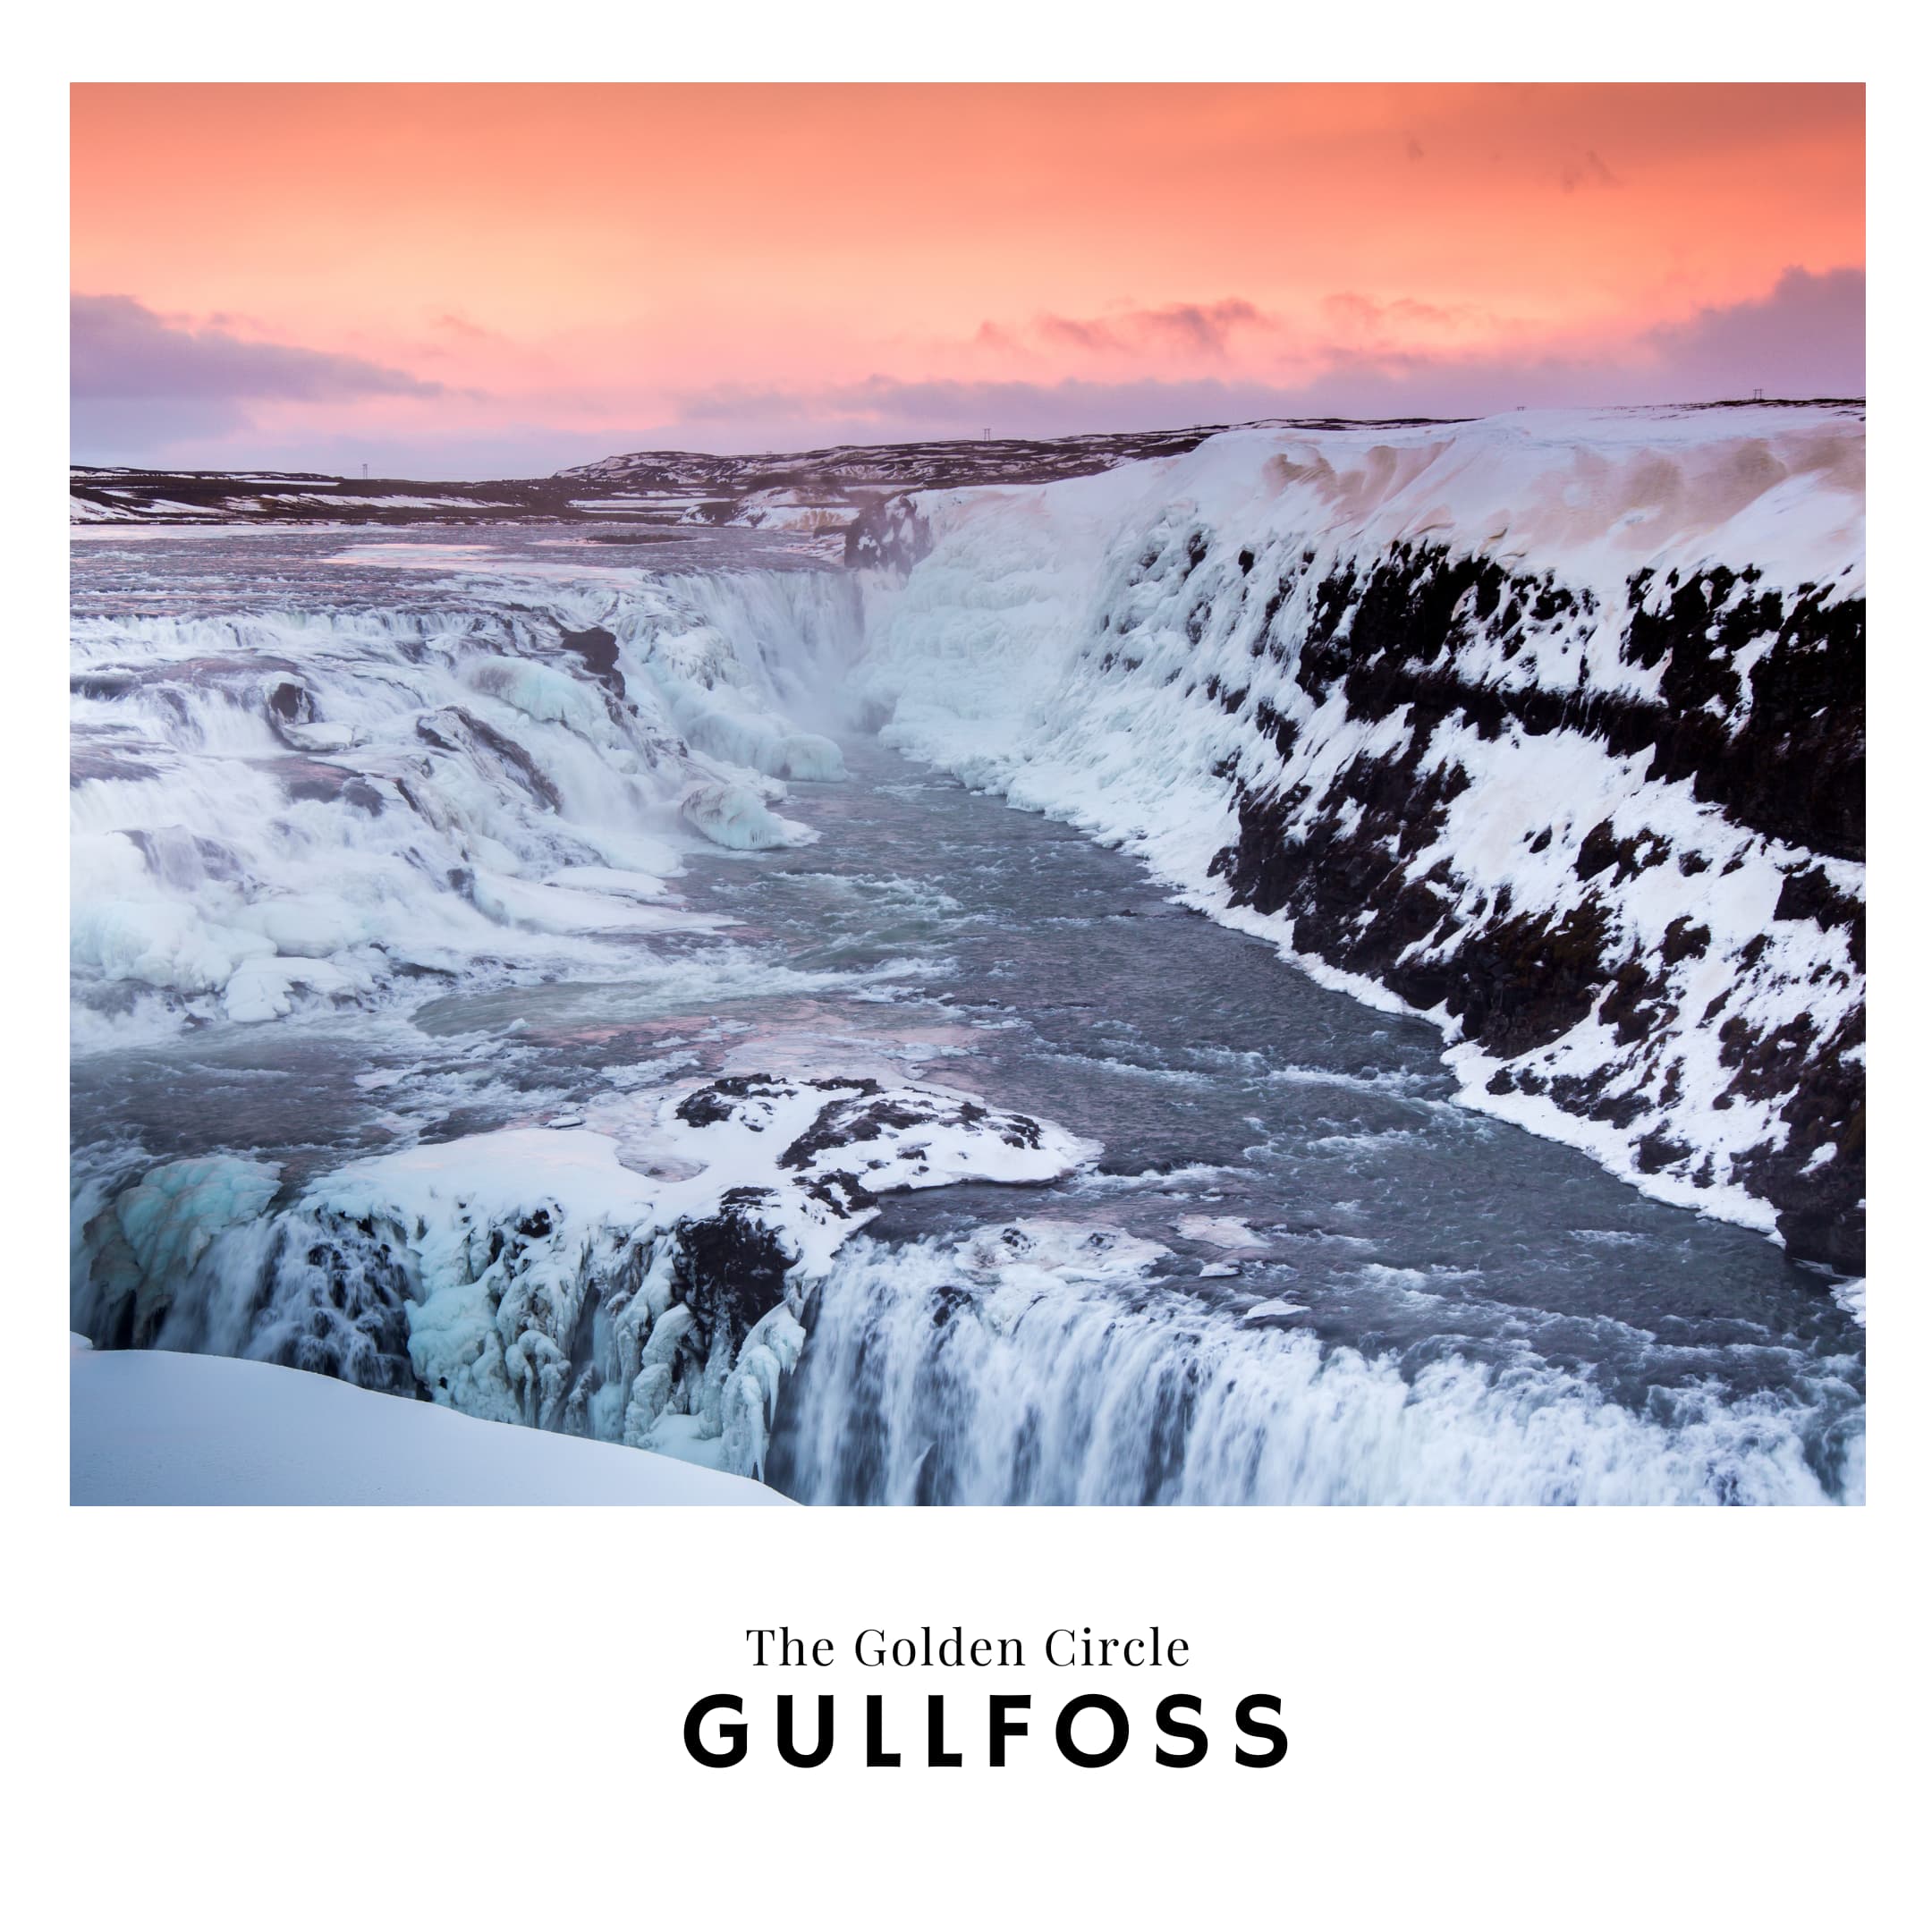 Link to the Gullfoss waterfall travel guide in Iceland Golden Circle